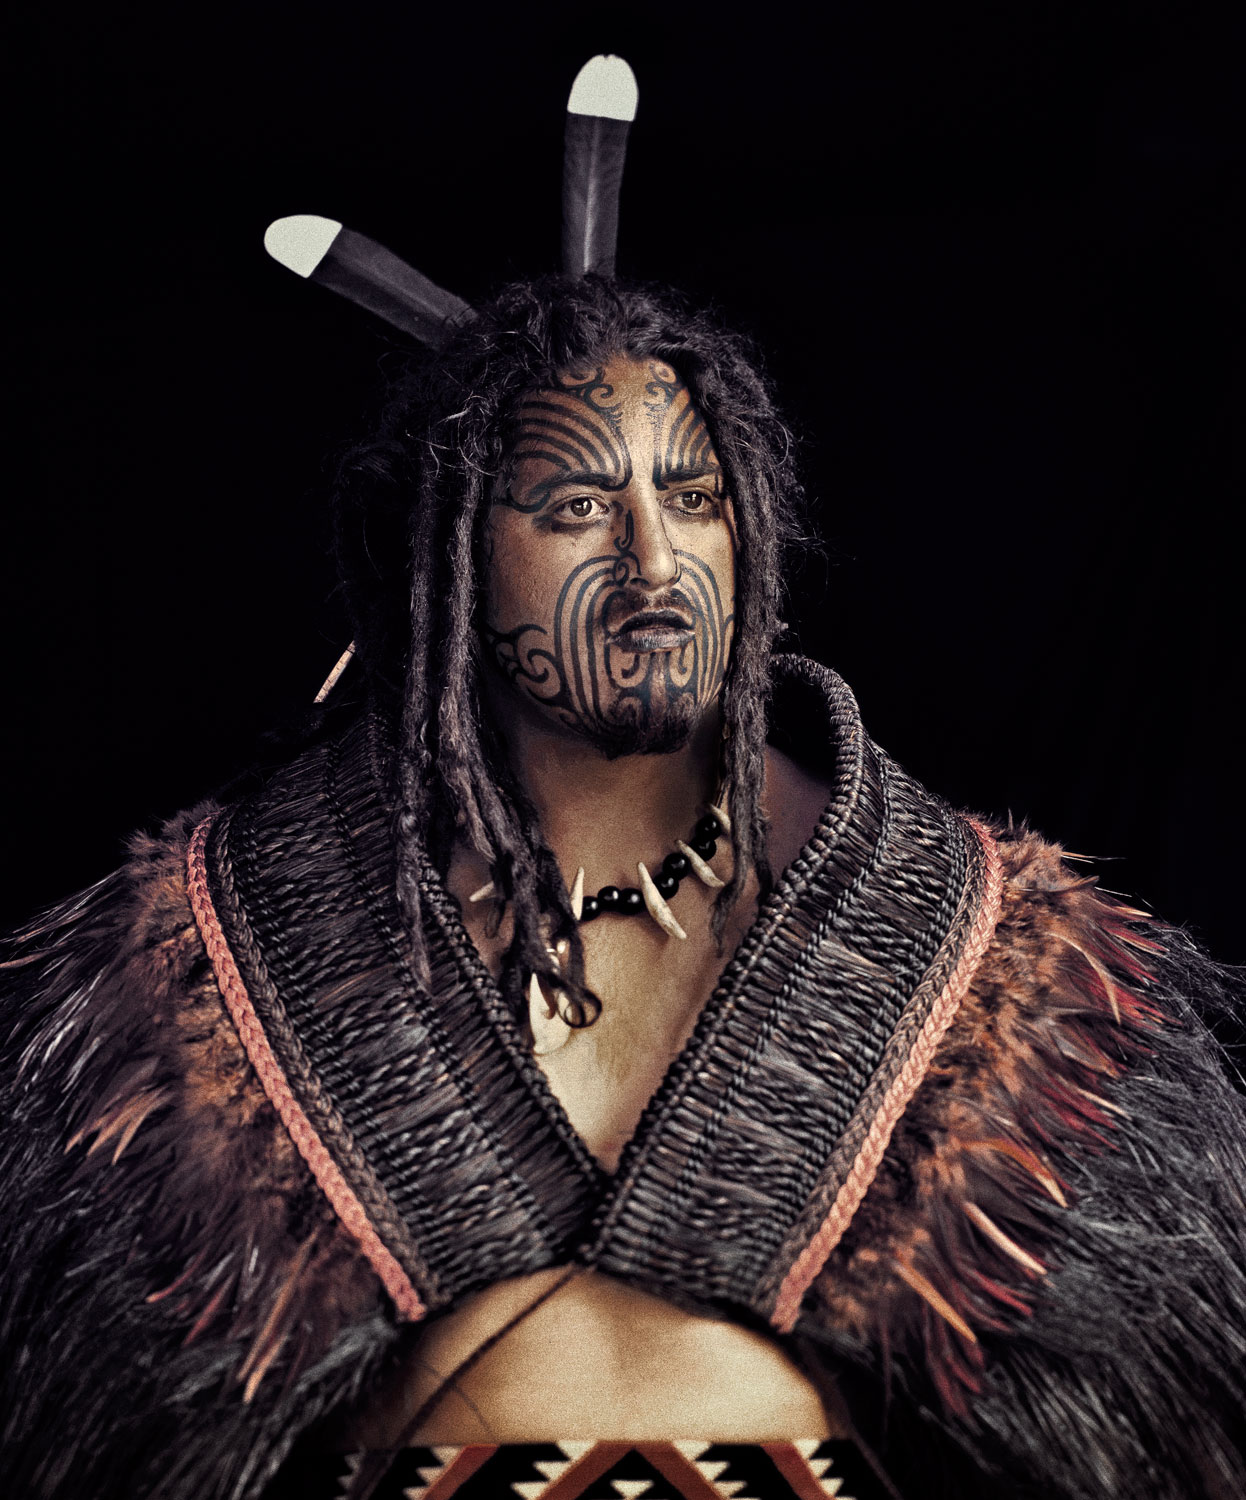 White Wolf : Stunning Portraits Of The Maori People By Photographer